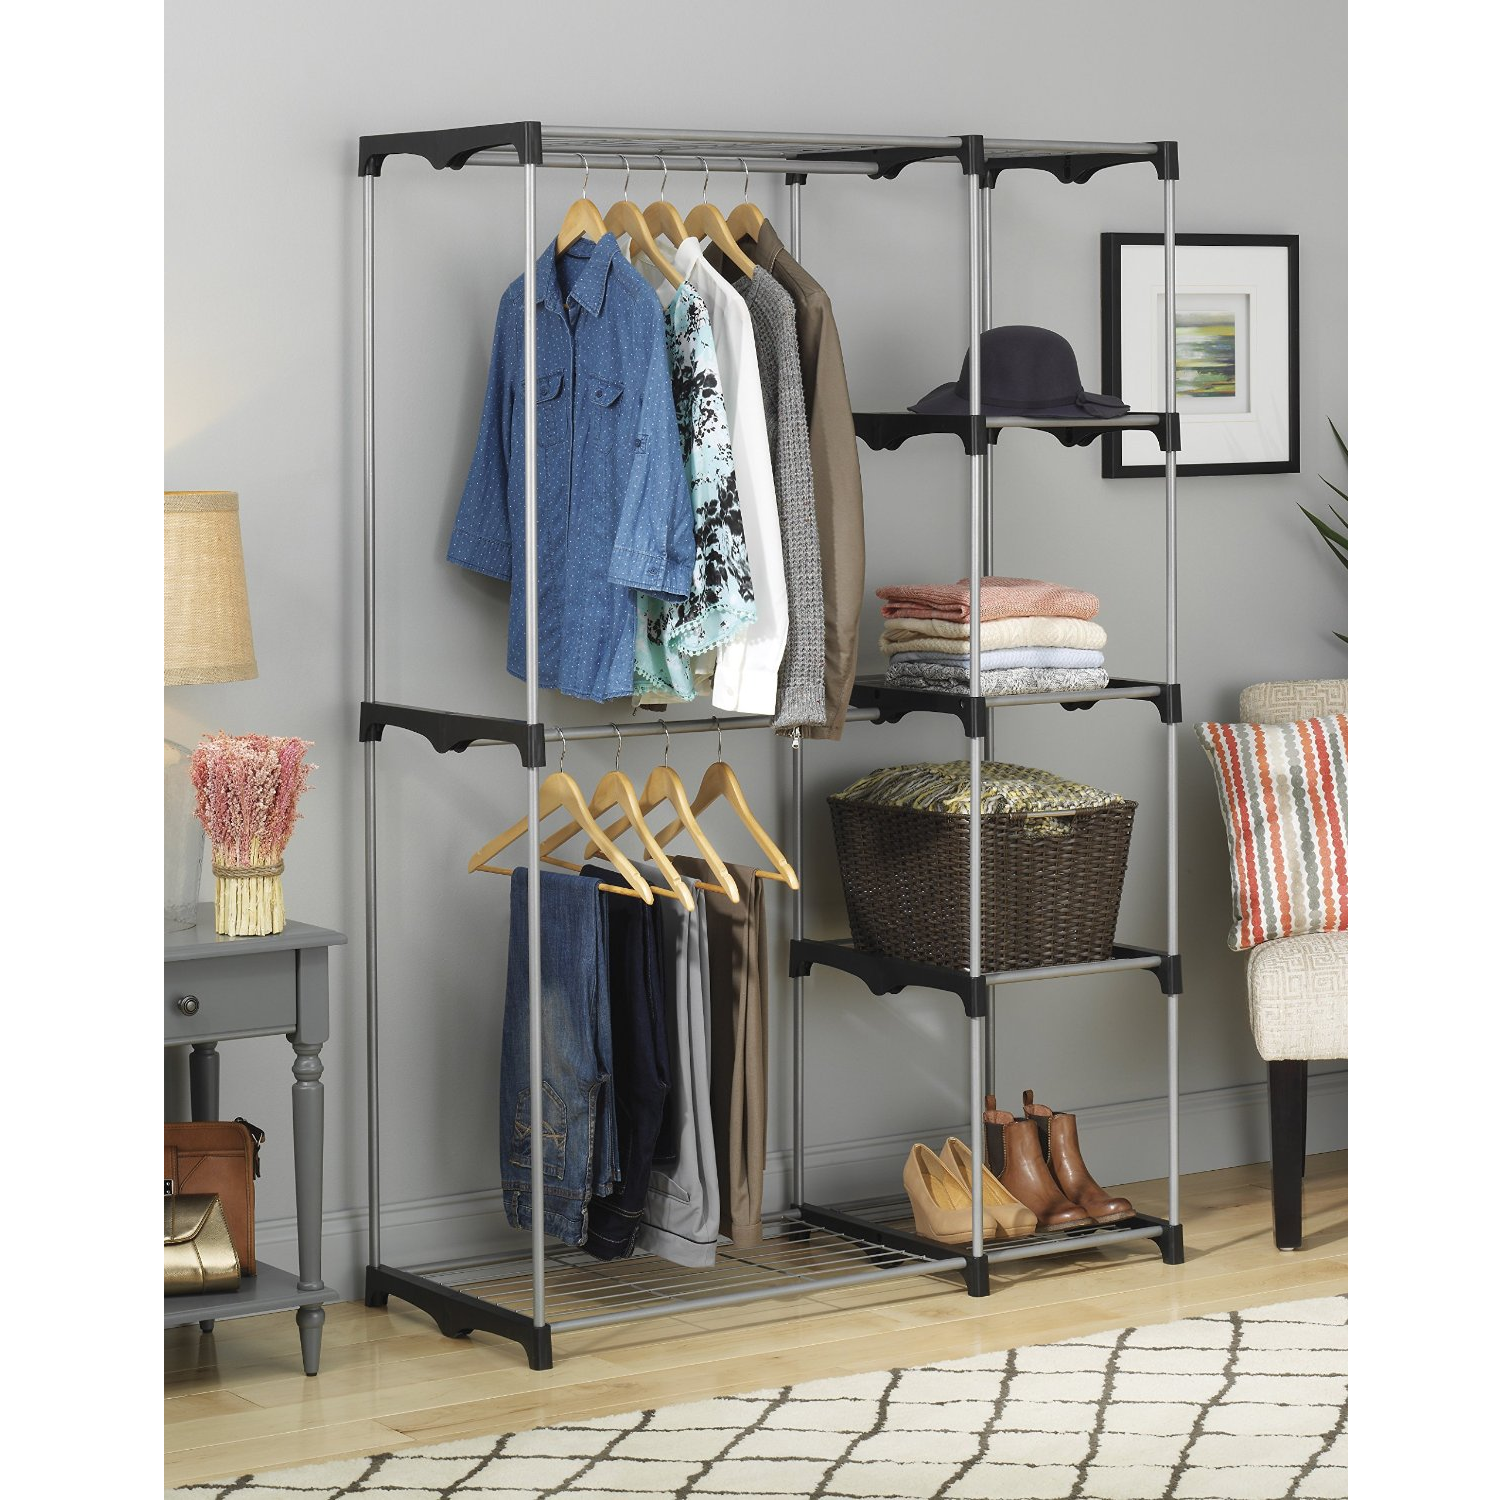 Double Rod Freestanding Closet Only $32.15 Shipped!